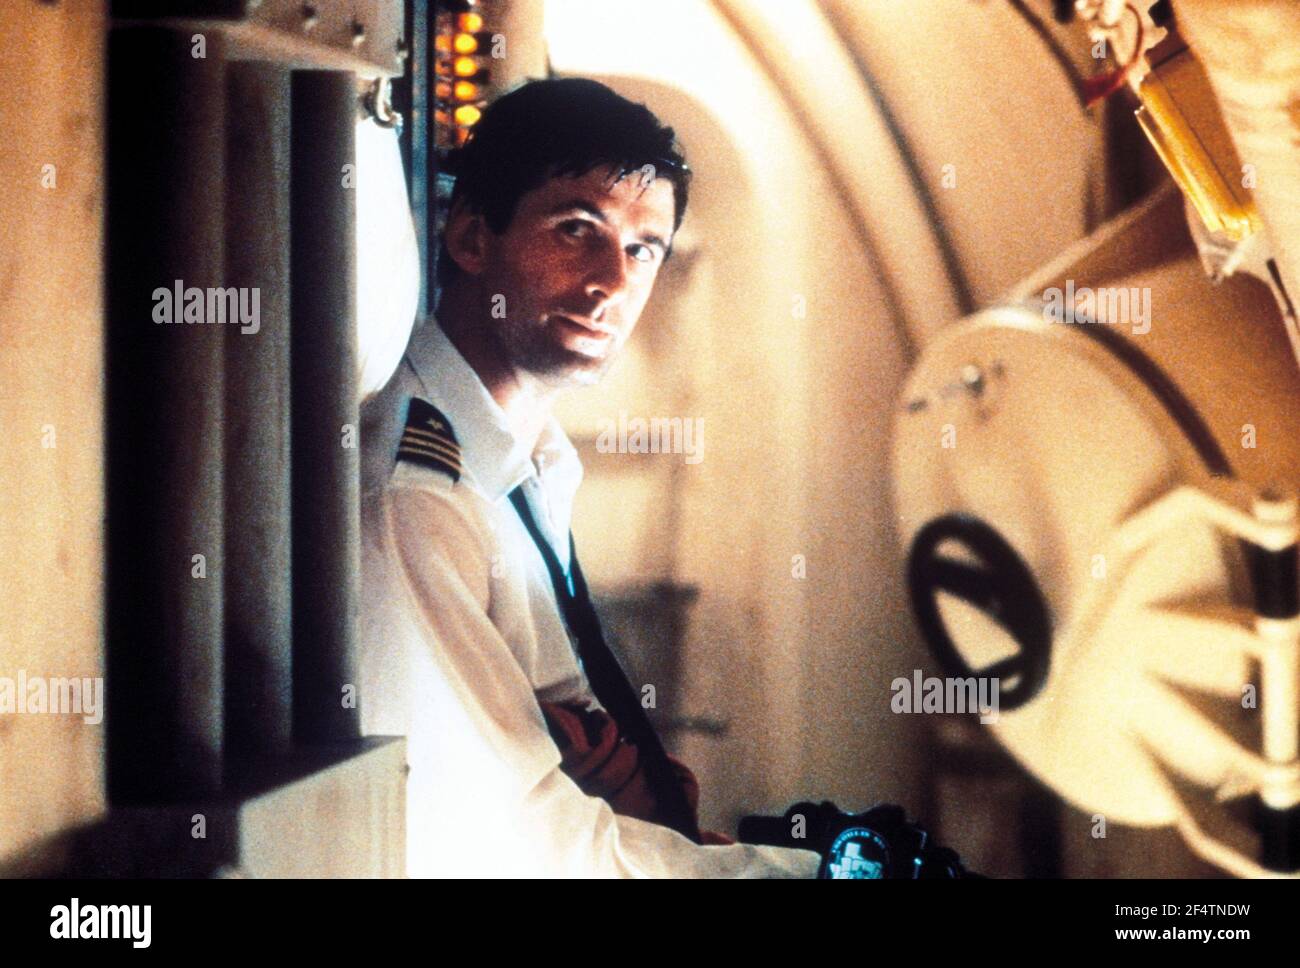 ALEC BALDWIN in THE HUNT FOR RED OCTOBER (1990), directed by JOHN MCTIERNAN. Credit: PARAMOUNT PICTURES / Album Stock Photo